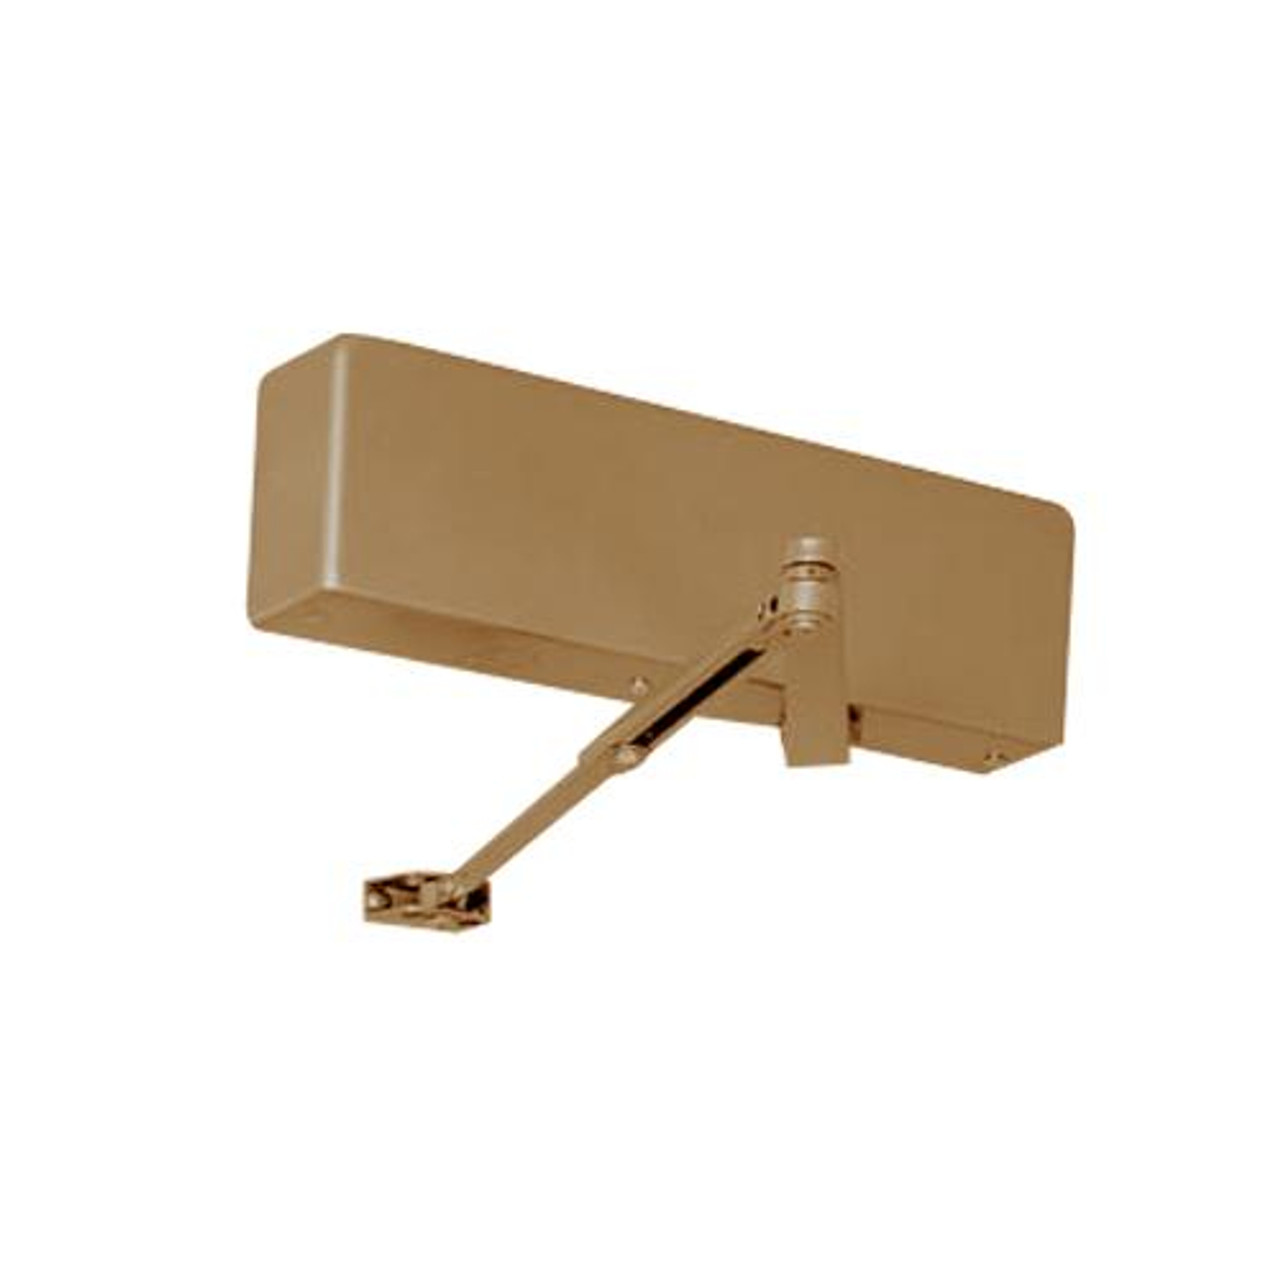 TJL4410-691 Yale 4400 Series Institutional Door Closer with Top Jamb Only Reveals 2-3/4" to 7" in Light Bronze